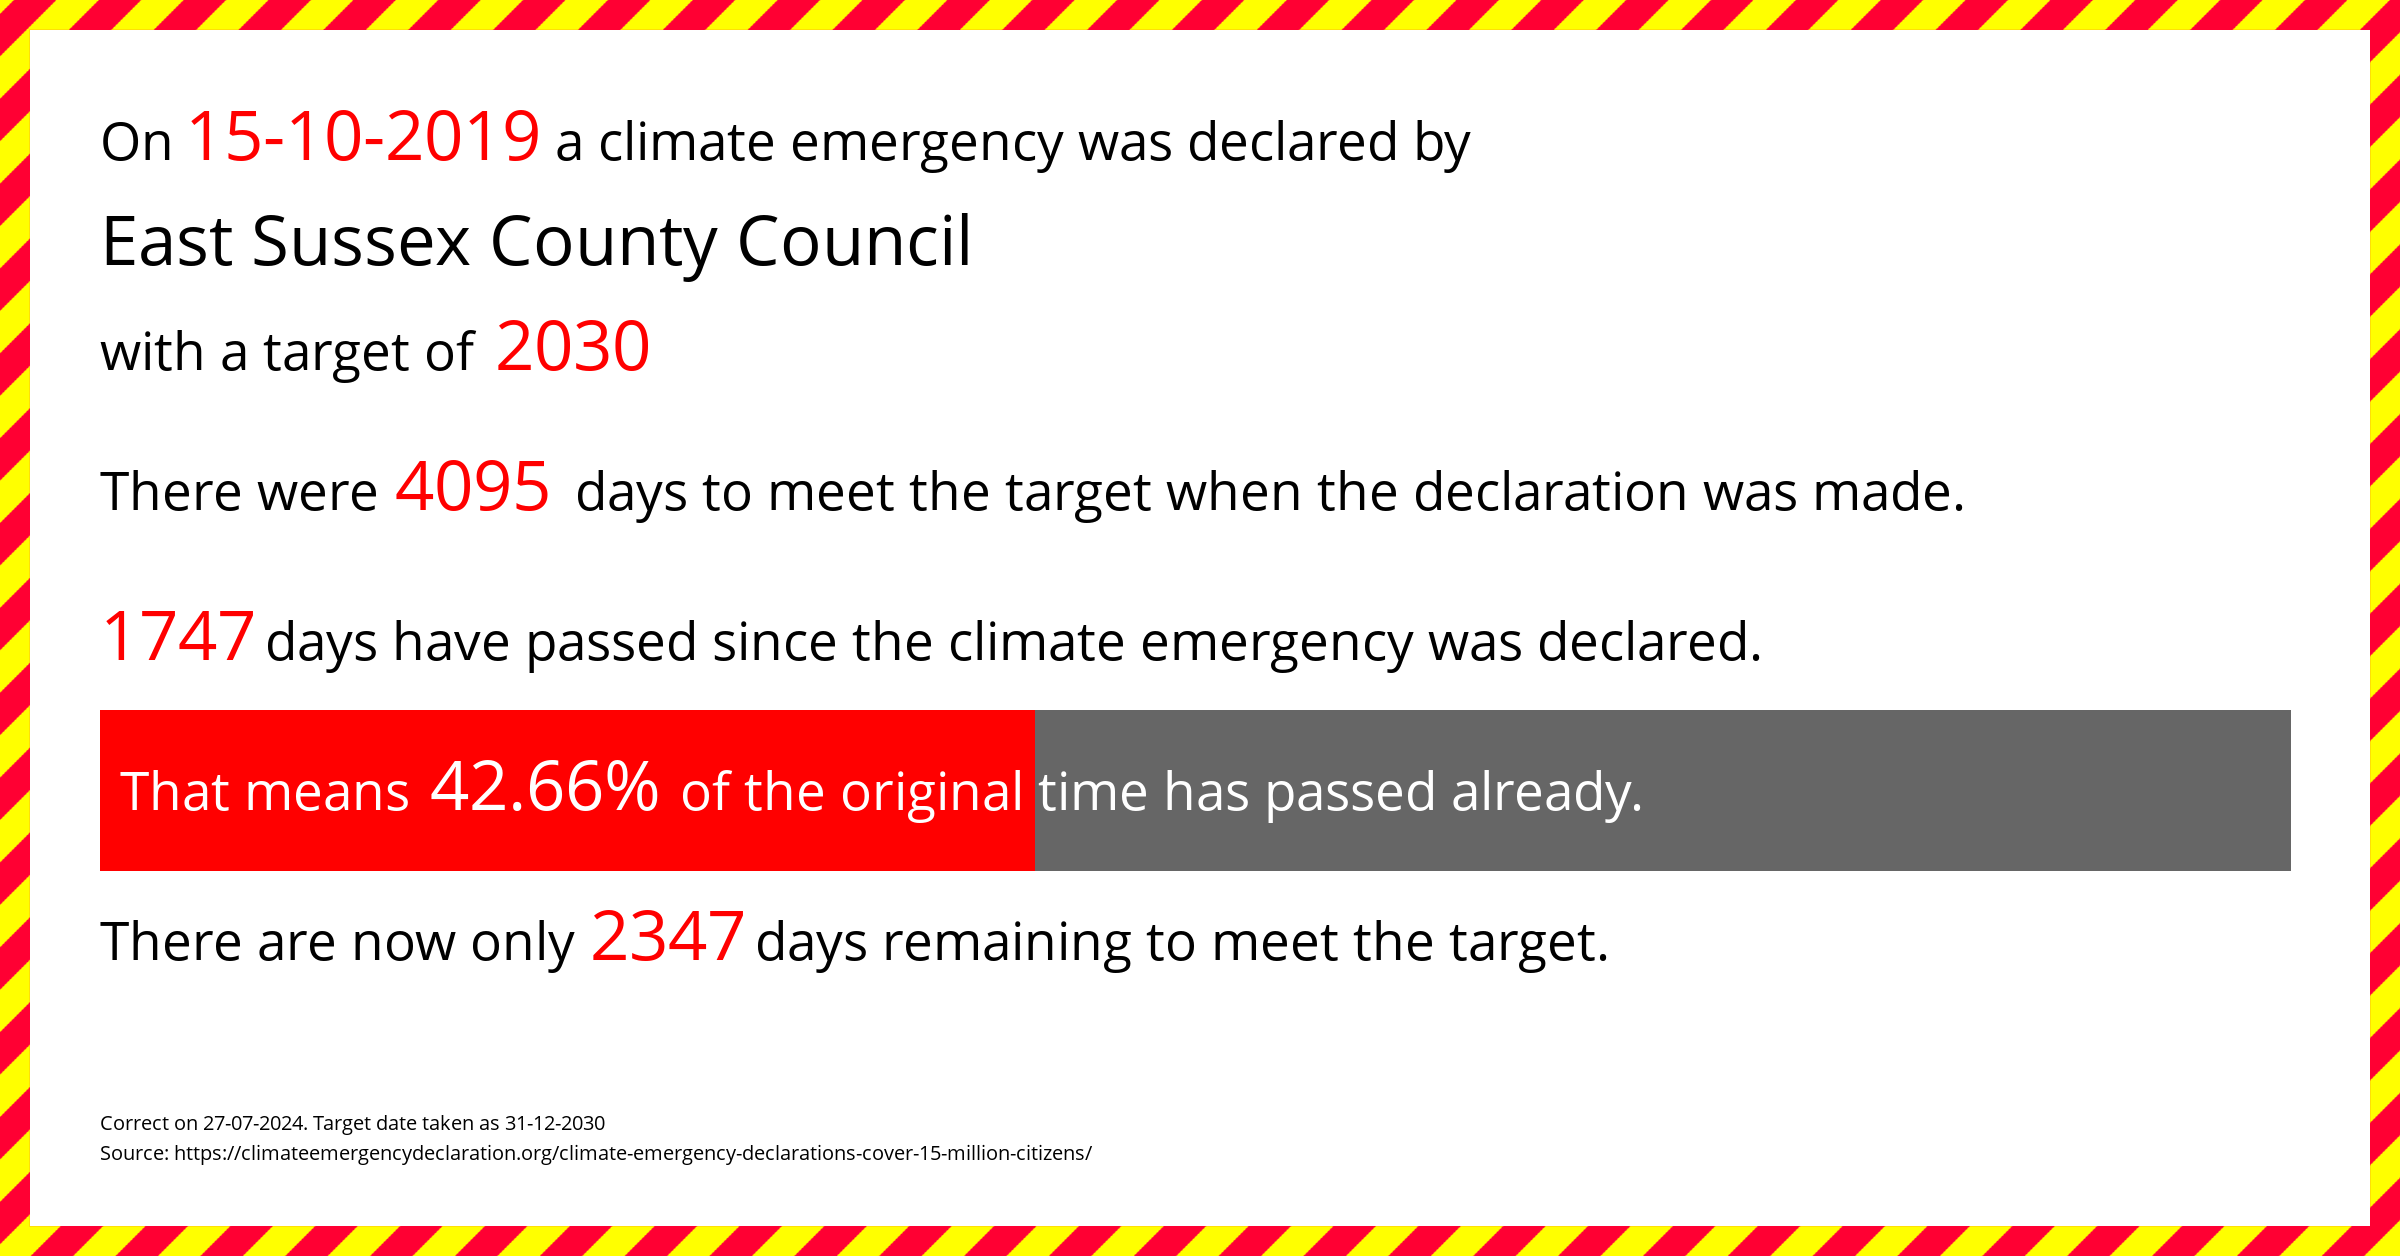 East Sussex County Council declared a Climate emergency on Tuesday 15th October 2019, with a target of 2030.